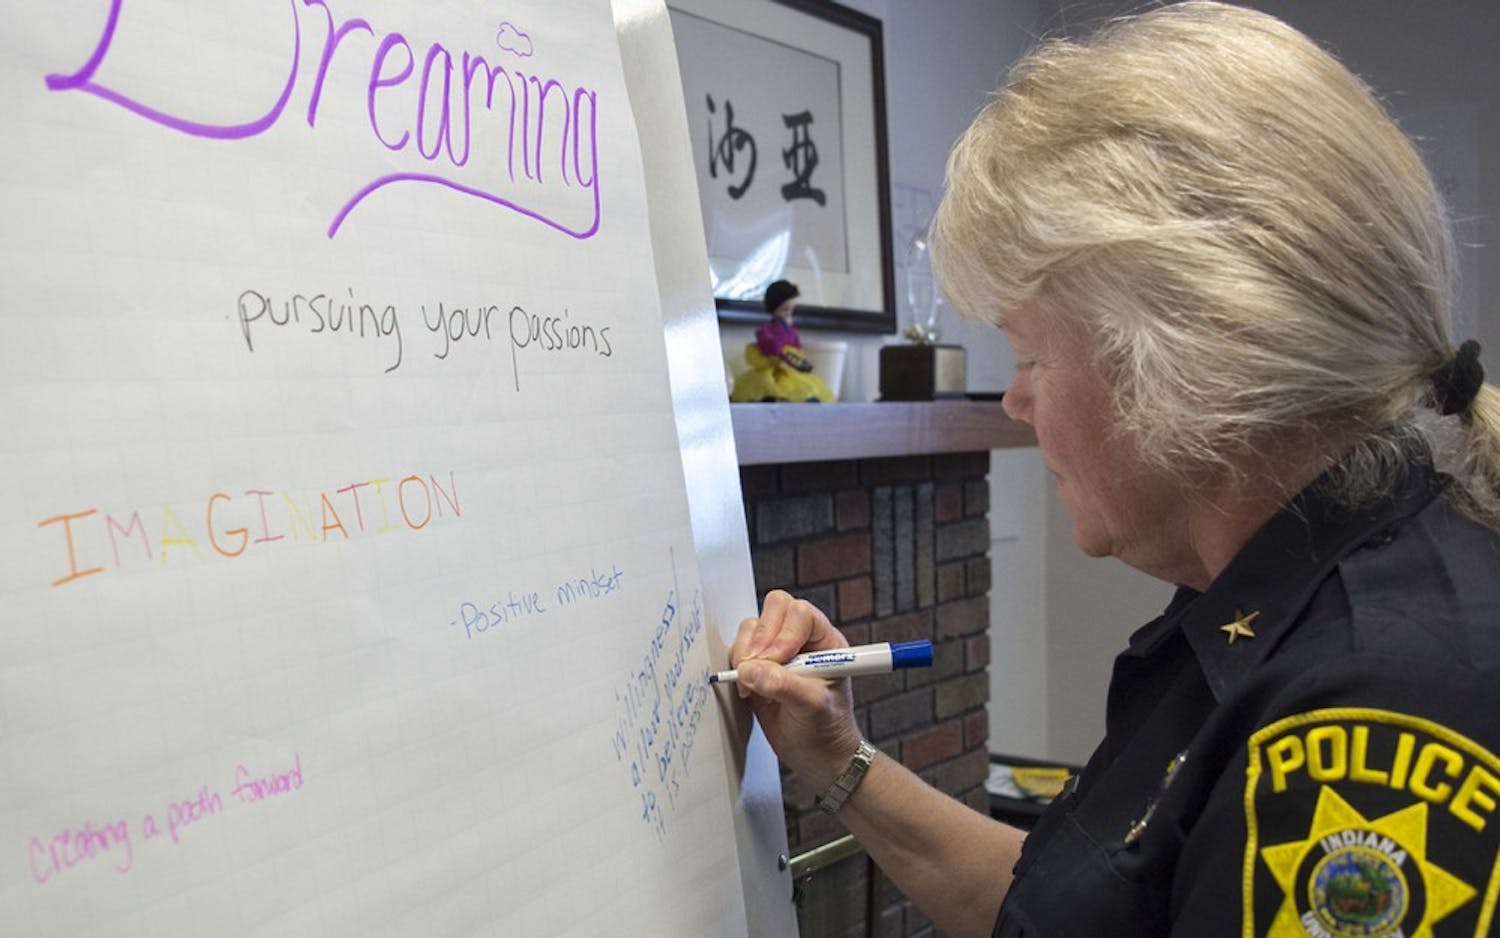 Laury Flint, Chief of Indiana University Police Department, writes donw her new year resolution during the workshop at Asian Culture Center, Jan 13. 